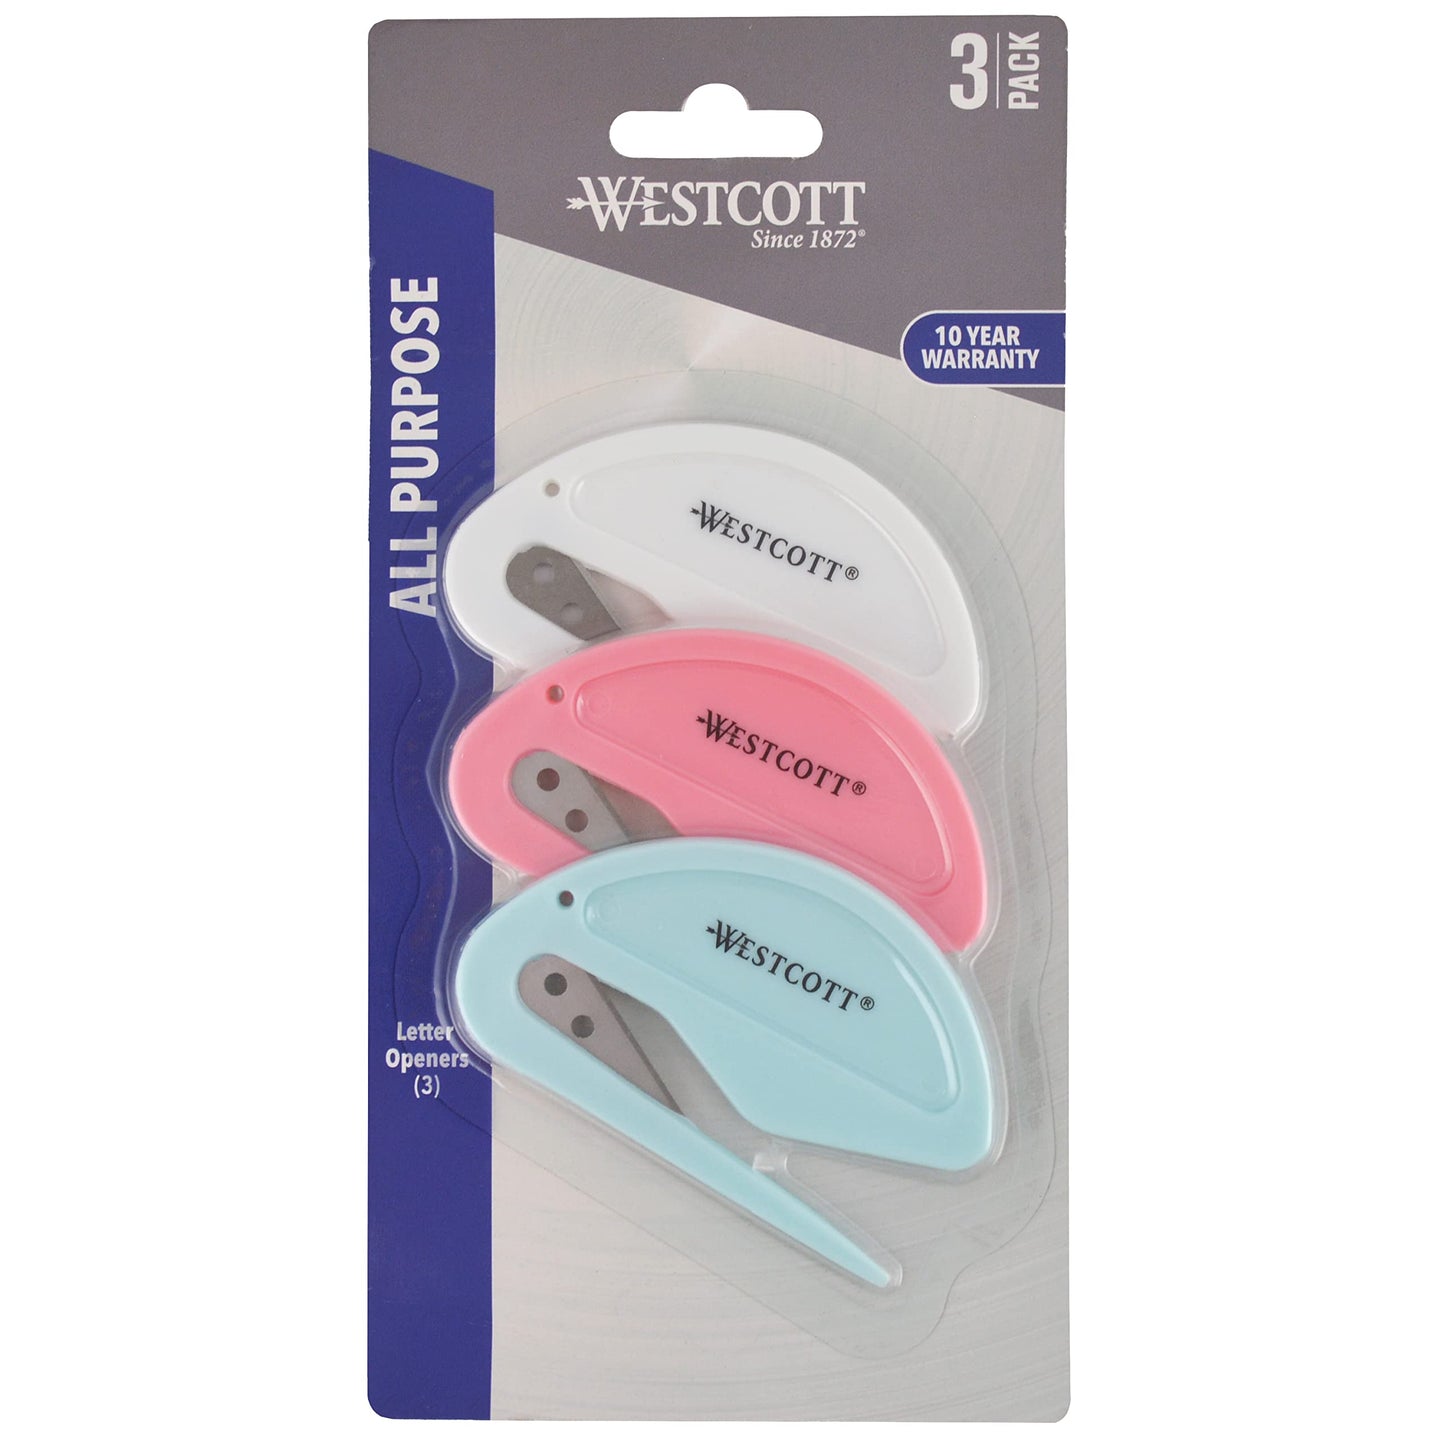 Westcott All Purpose Compact Letter Opener 3pk, Assorted Colors